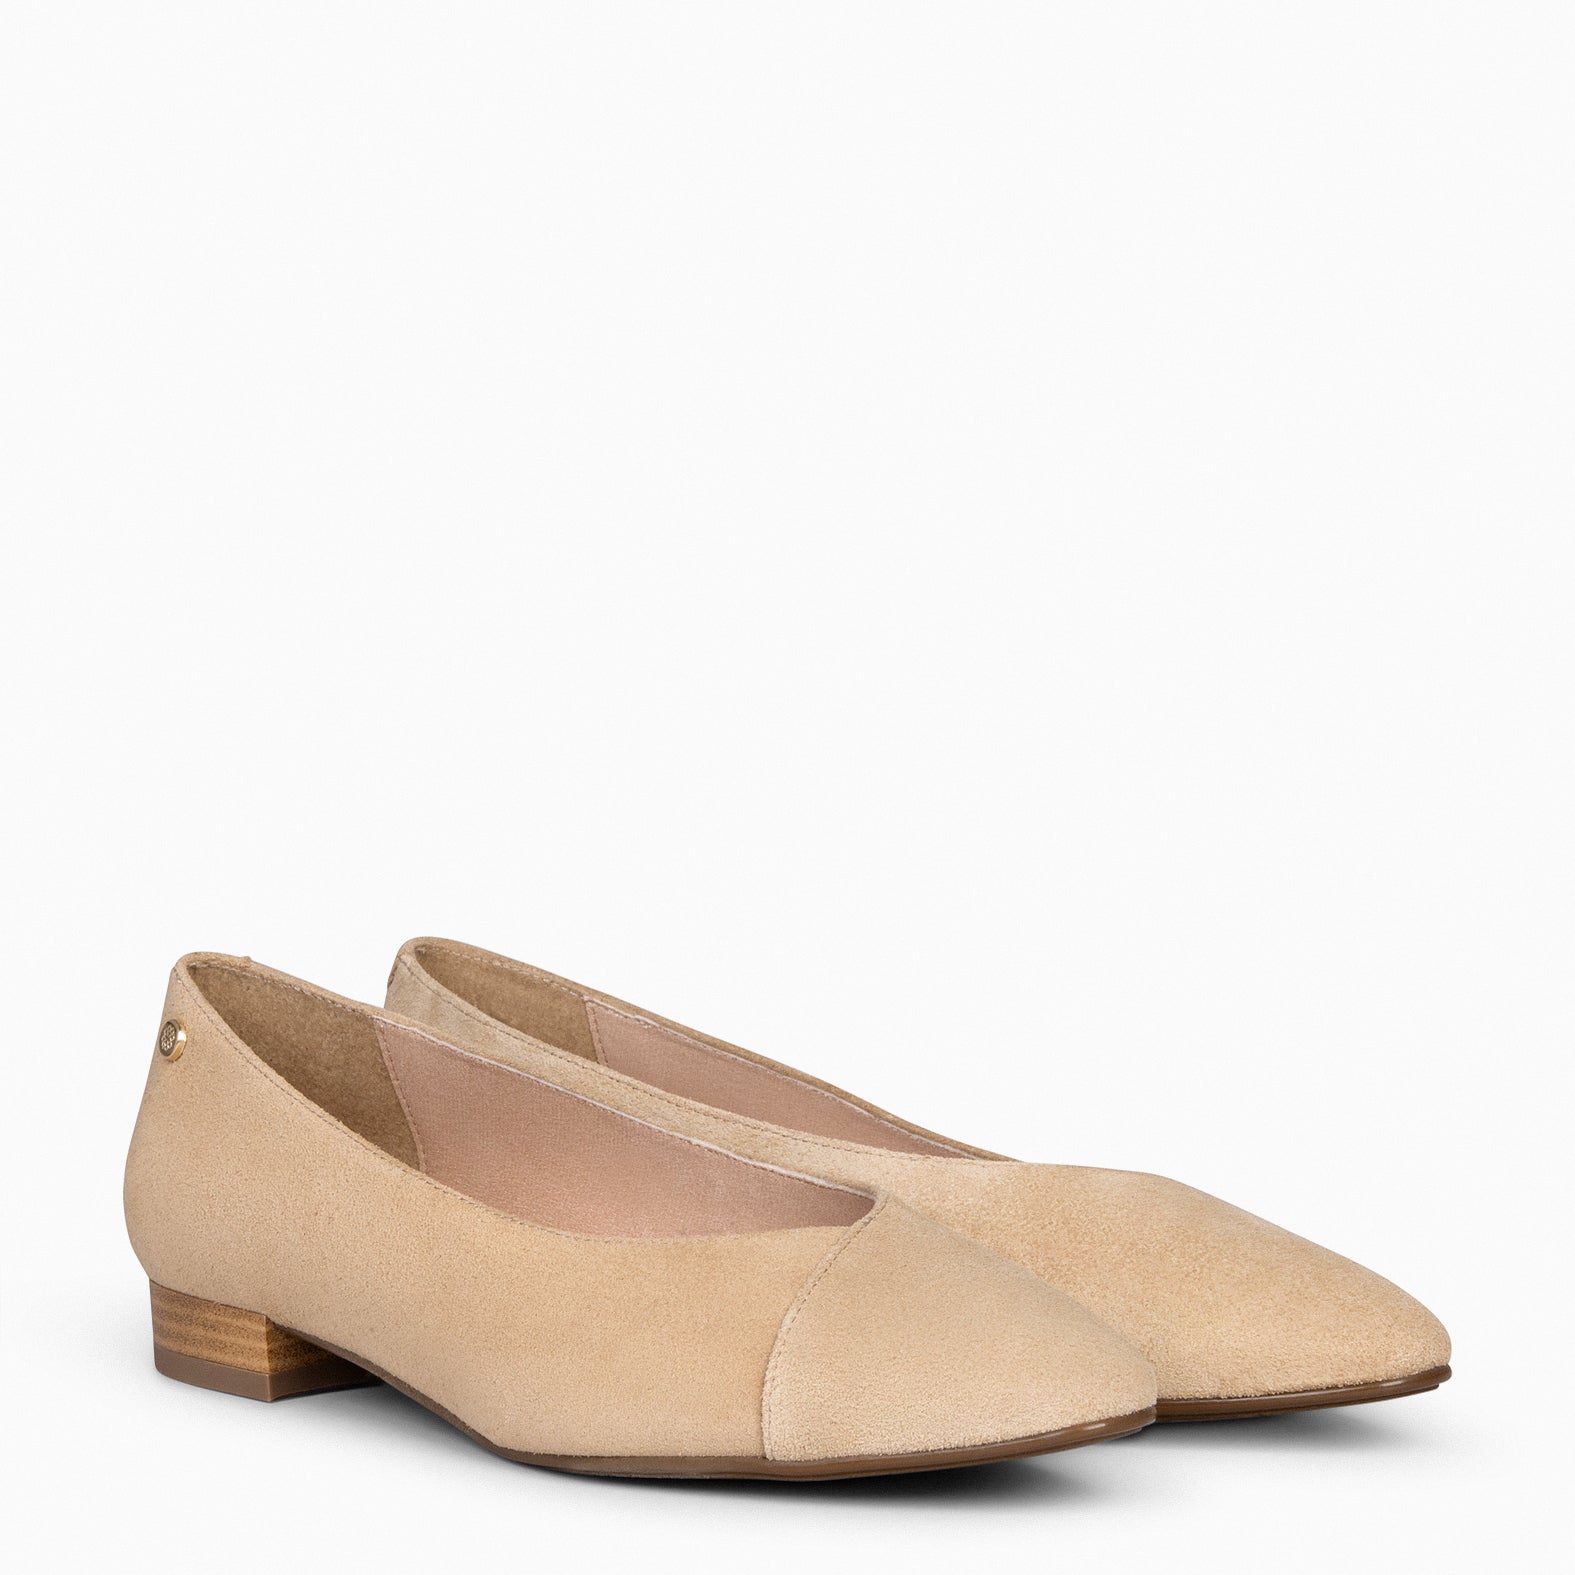 MARIE – TAN pointed flats